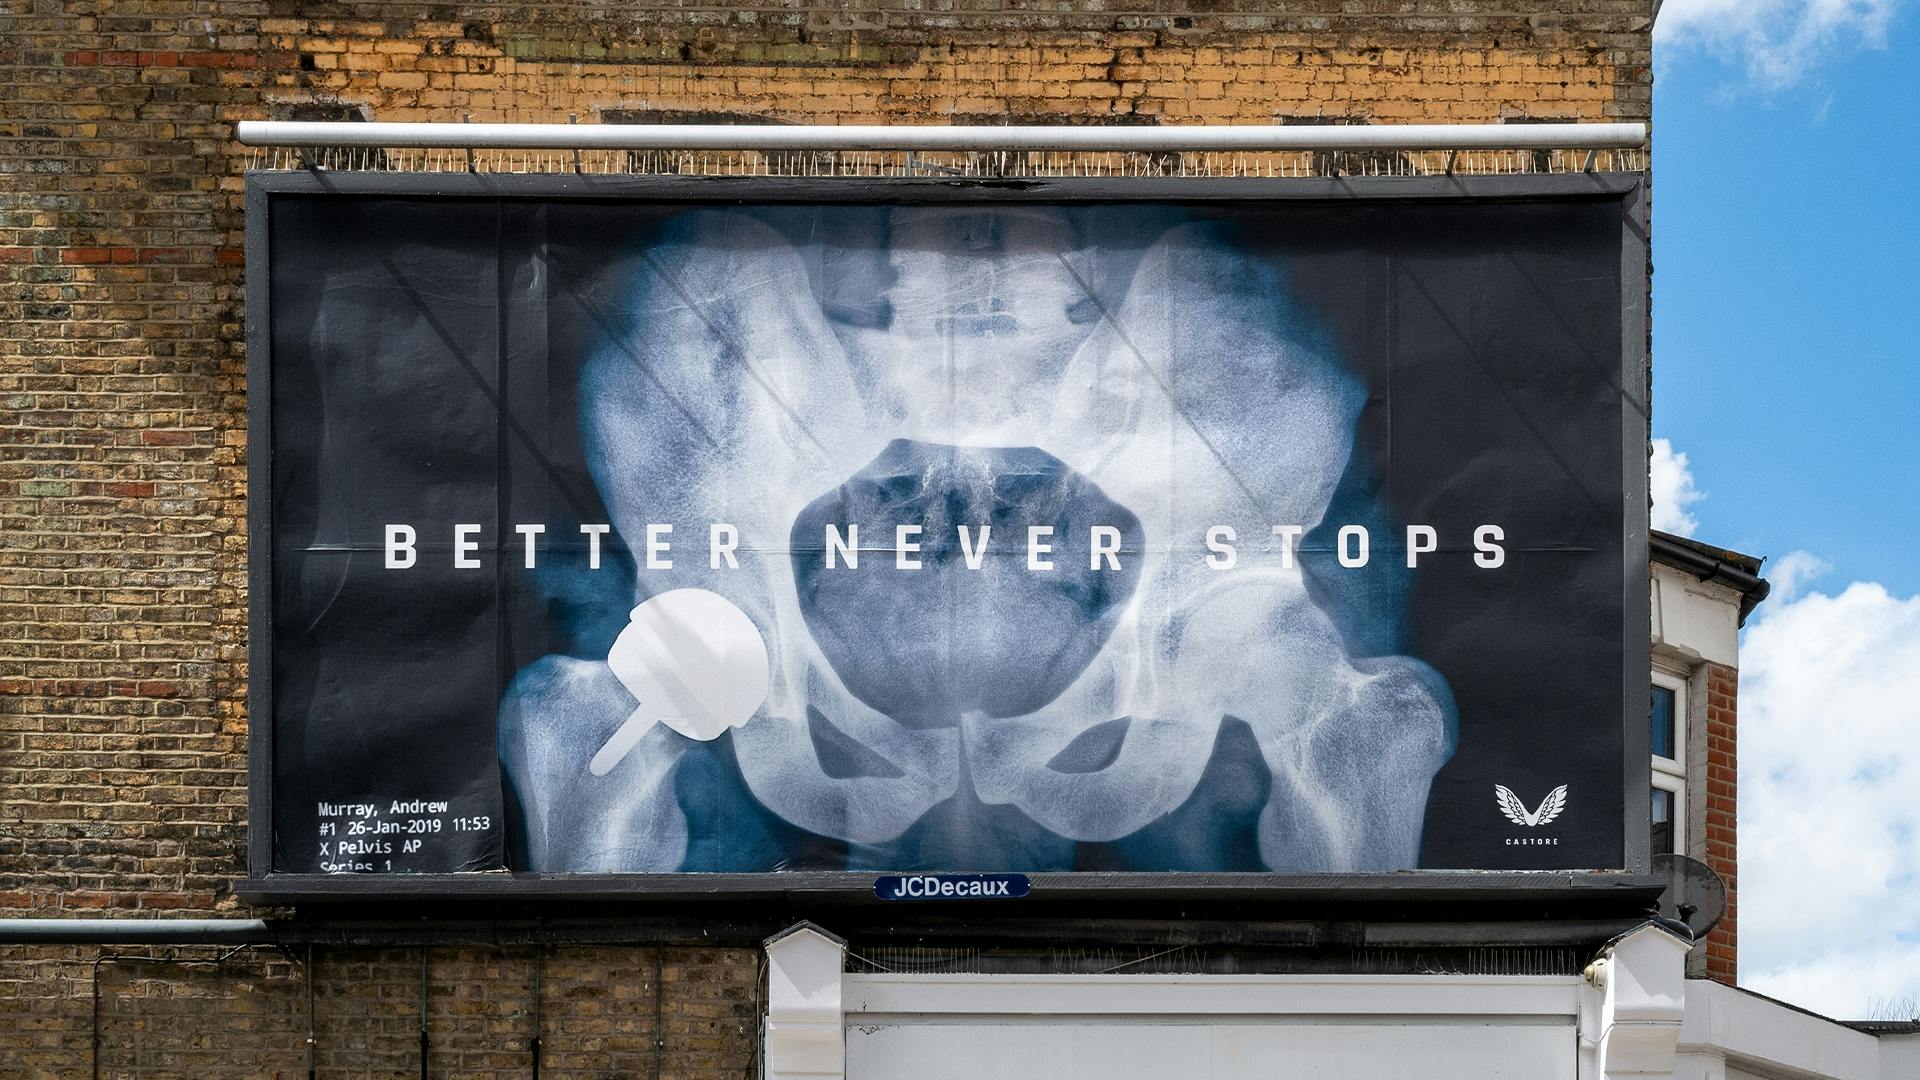 Billboard advert. X-Ray of Andy Murray's hip with the text "Better never stops".